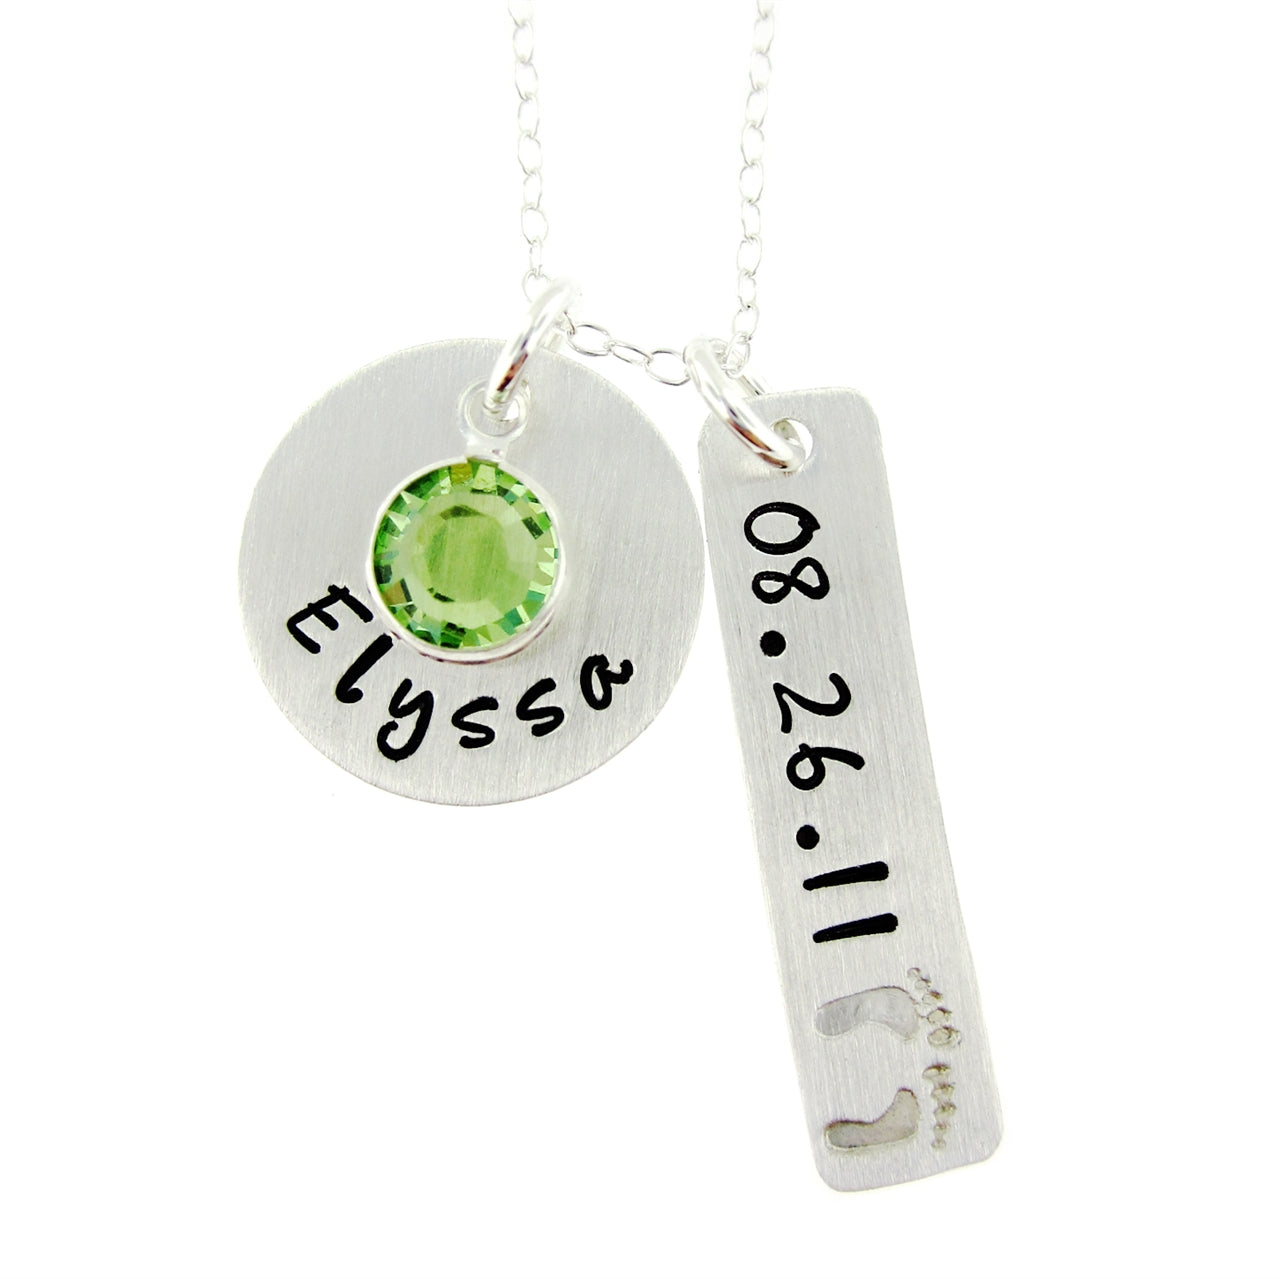 Let's Celebrate! Personalized Sterling Silver Baby Feet Necklace with Birthstone